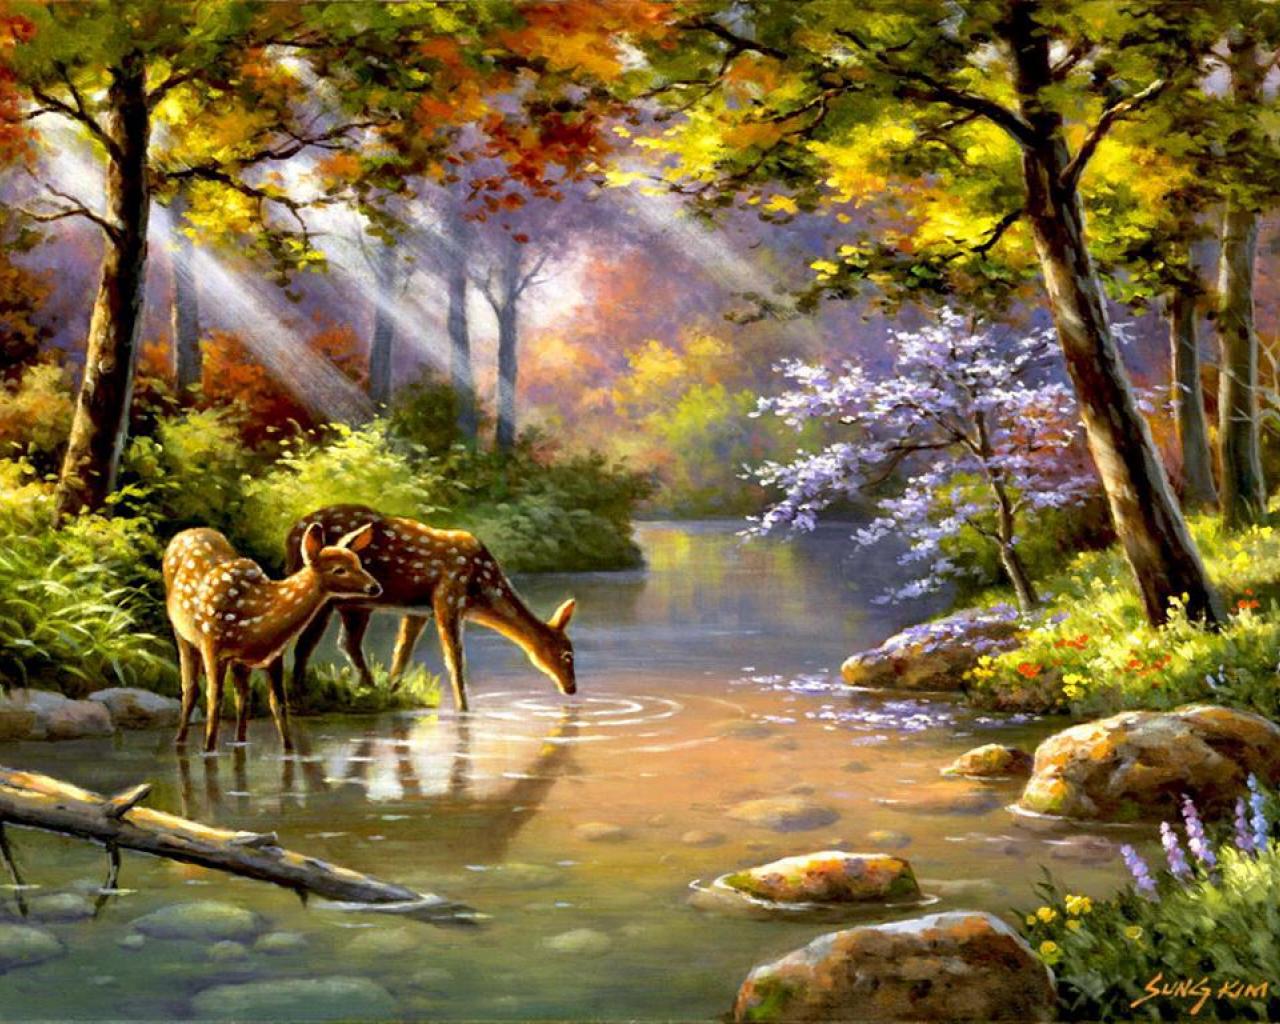 Best Paintings Of Nature - 1280x1024 Wallpaper 